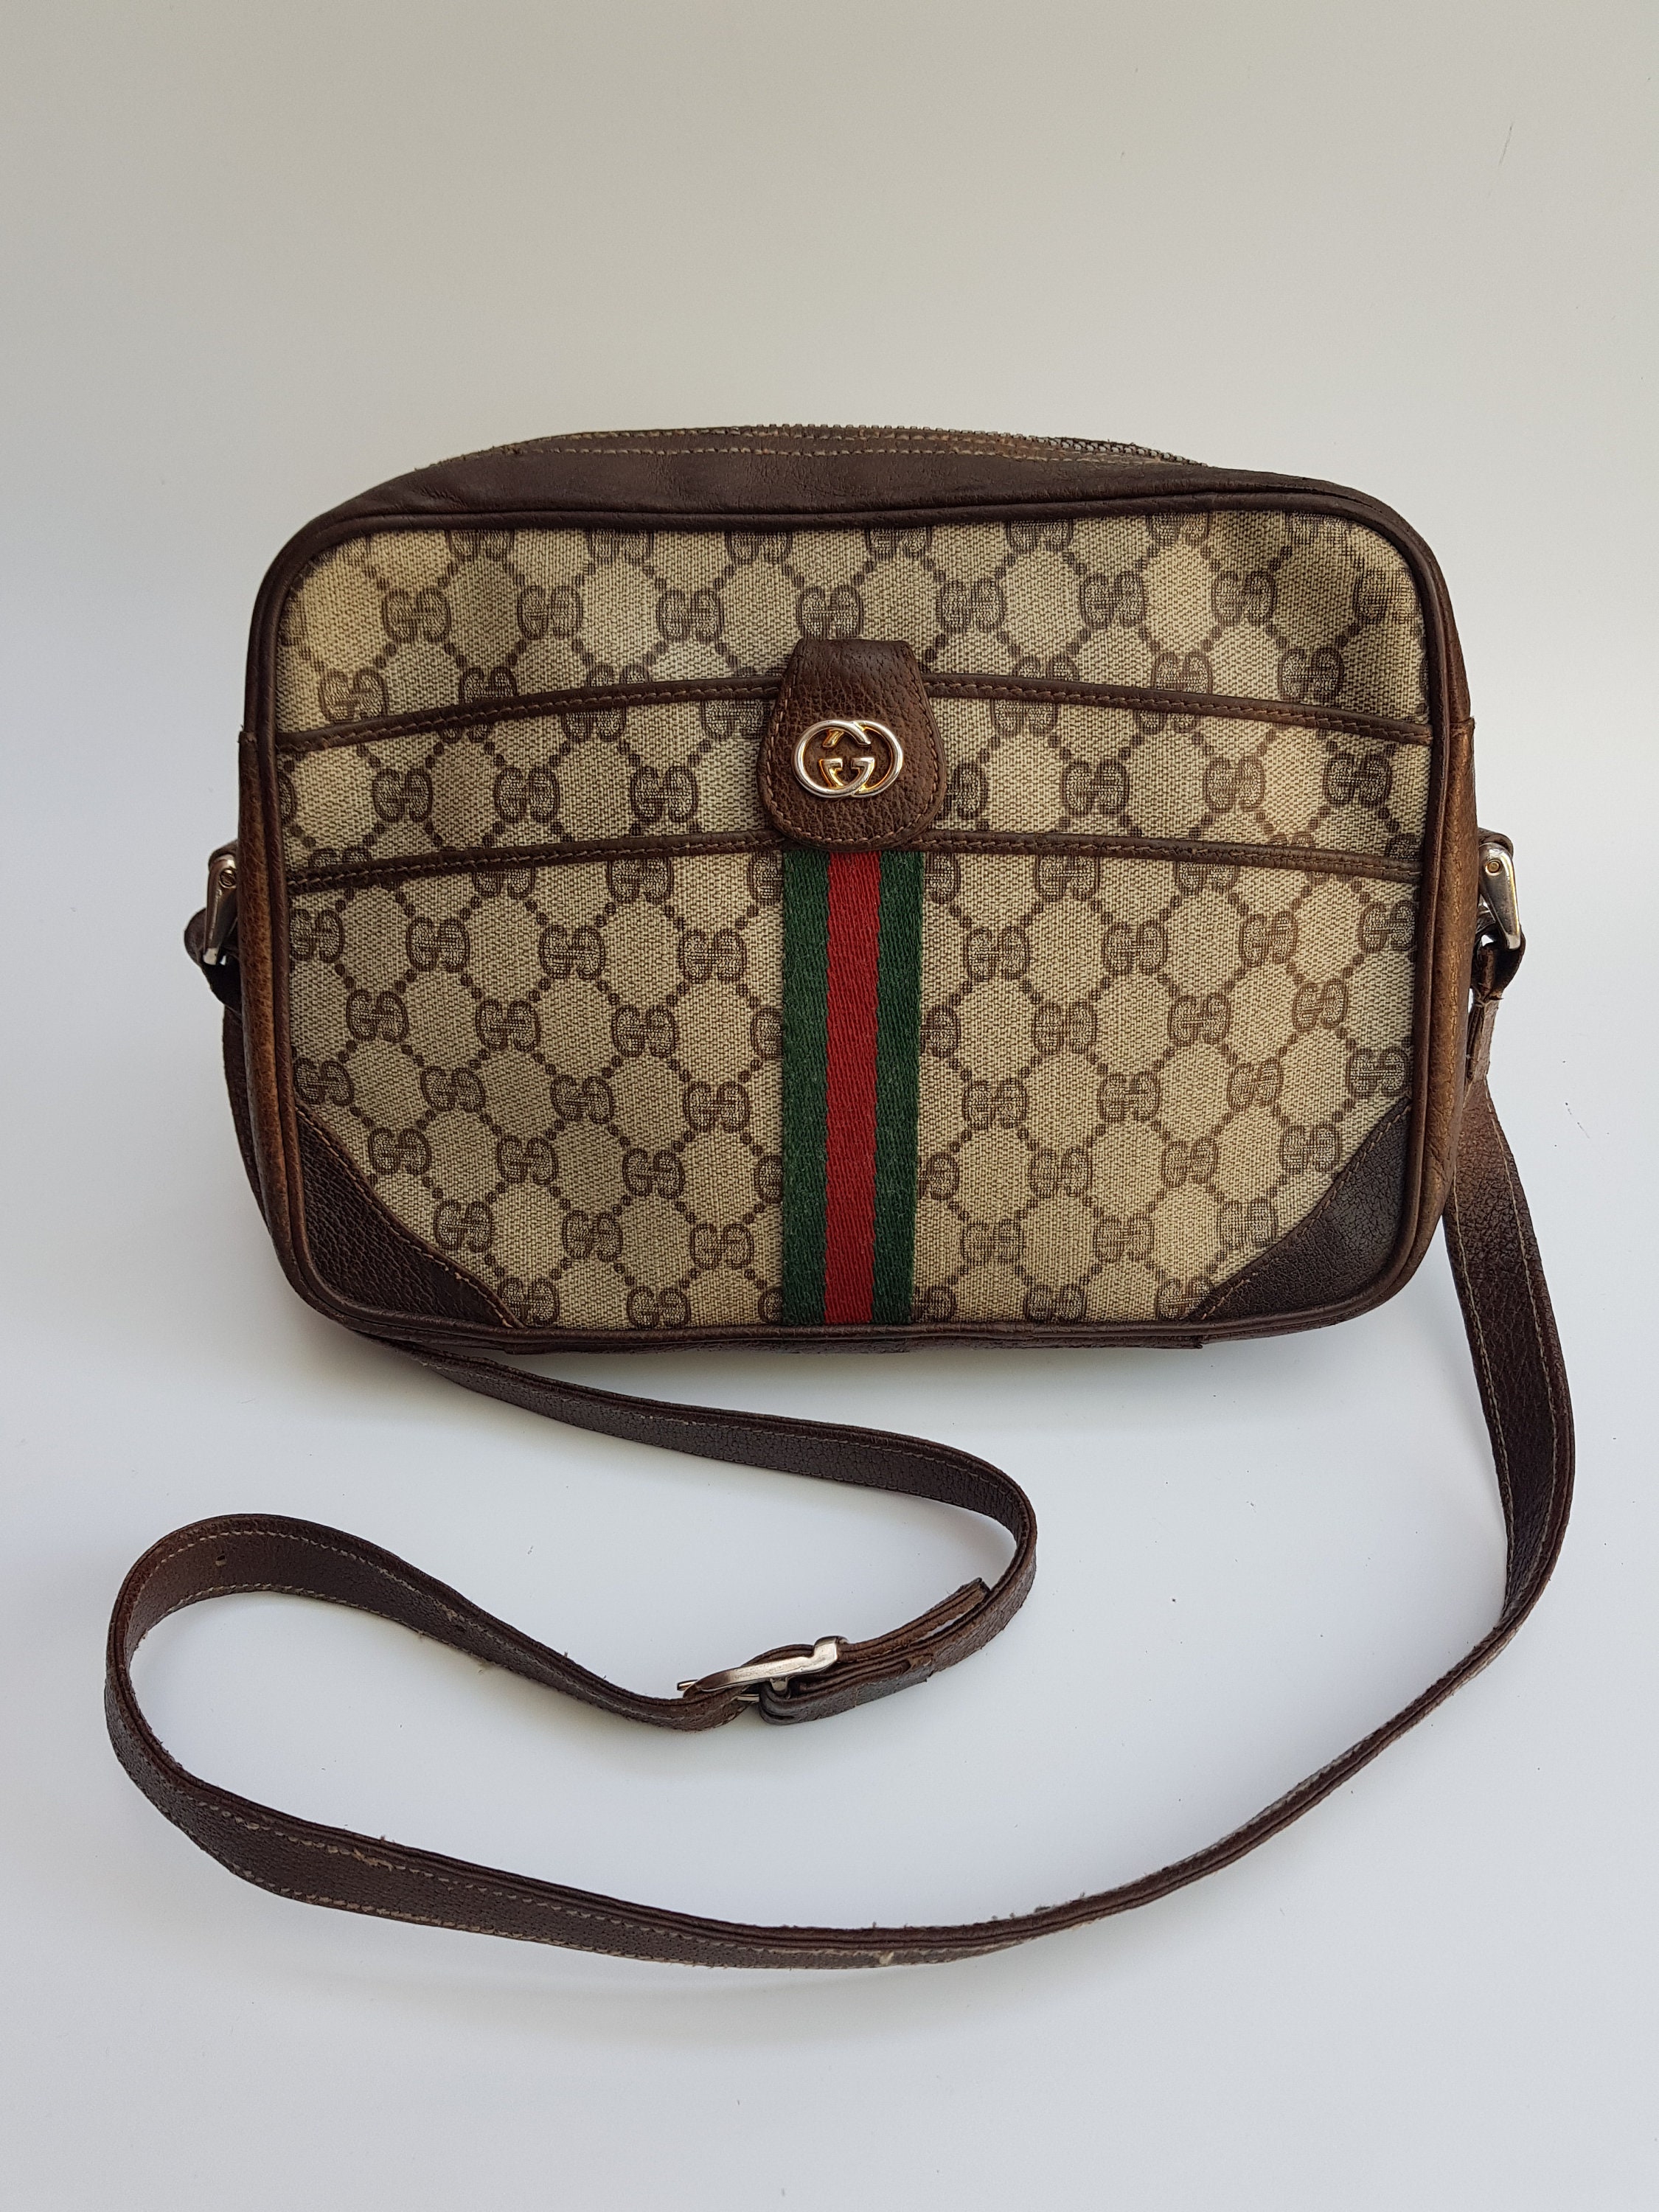 A vintage Gucci Ophidia canvas bowling bag, with brown leather